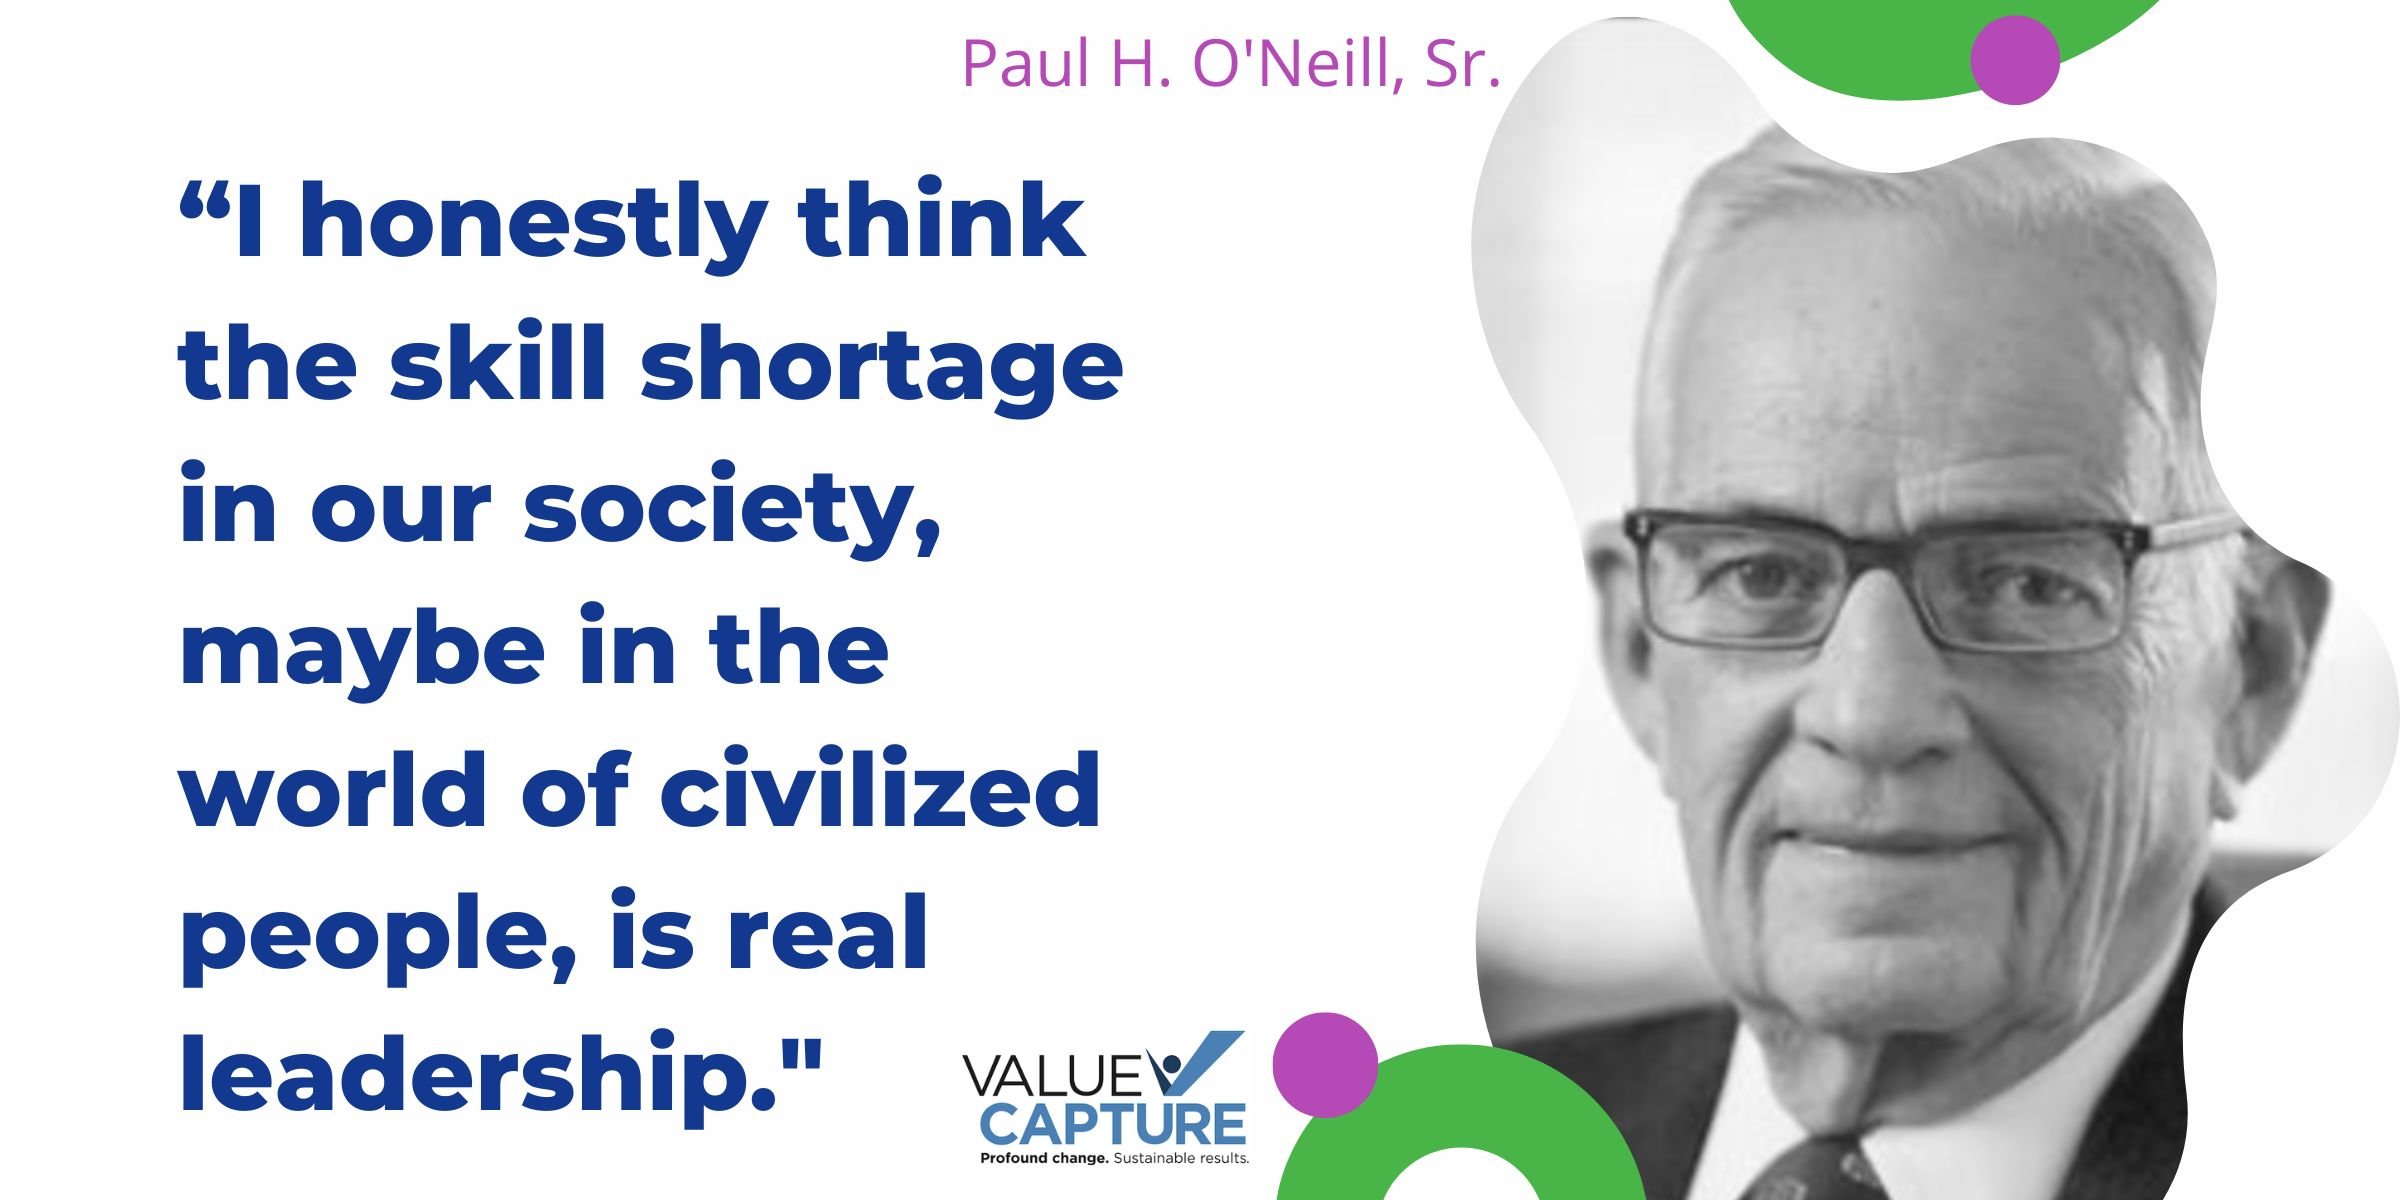 “I honestly think the skill shortage in our society, maybe in the world of civilized people, is real leadership." Paul O'Neill